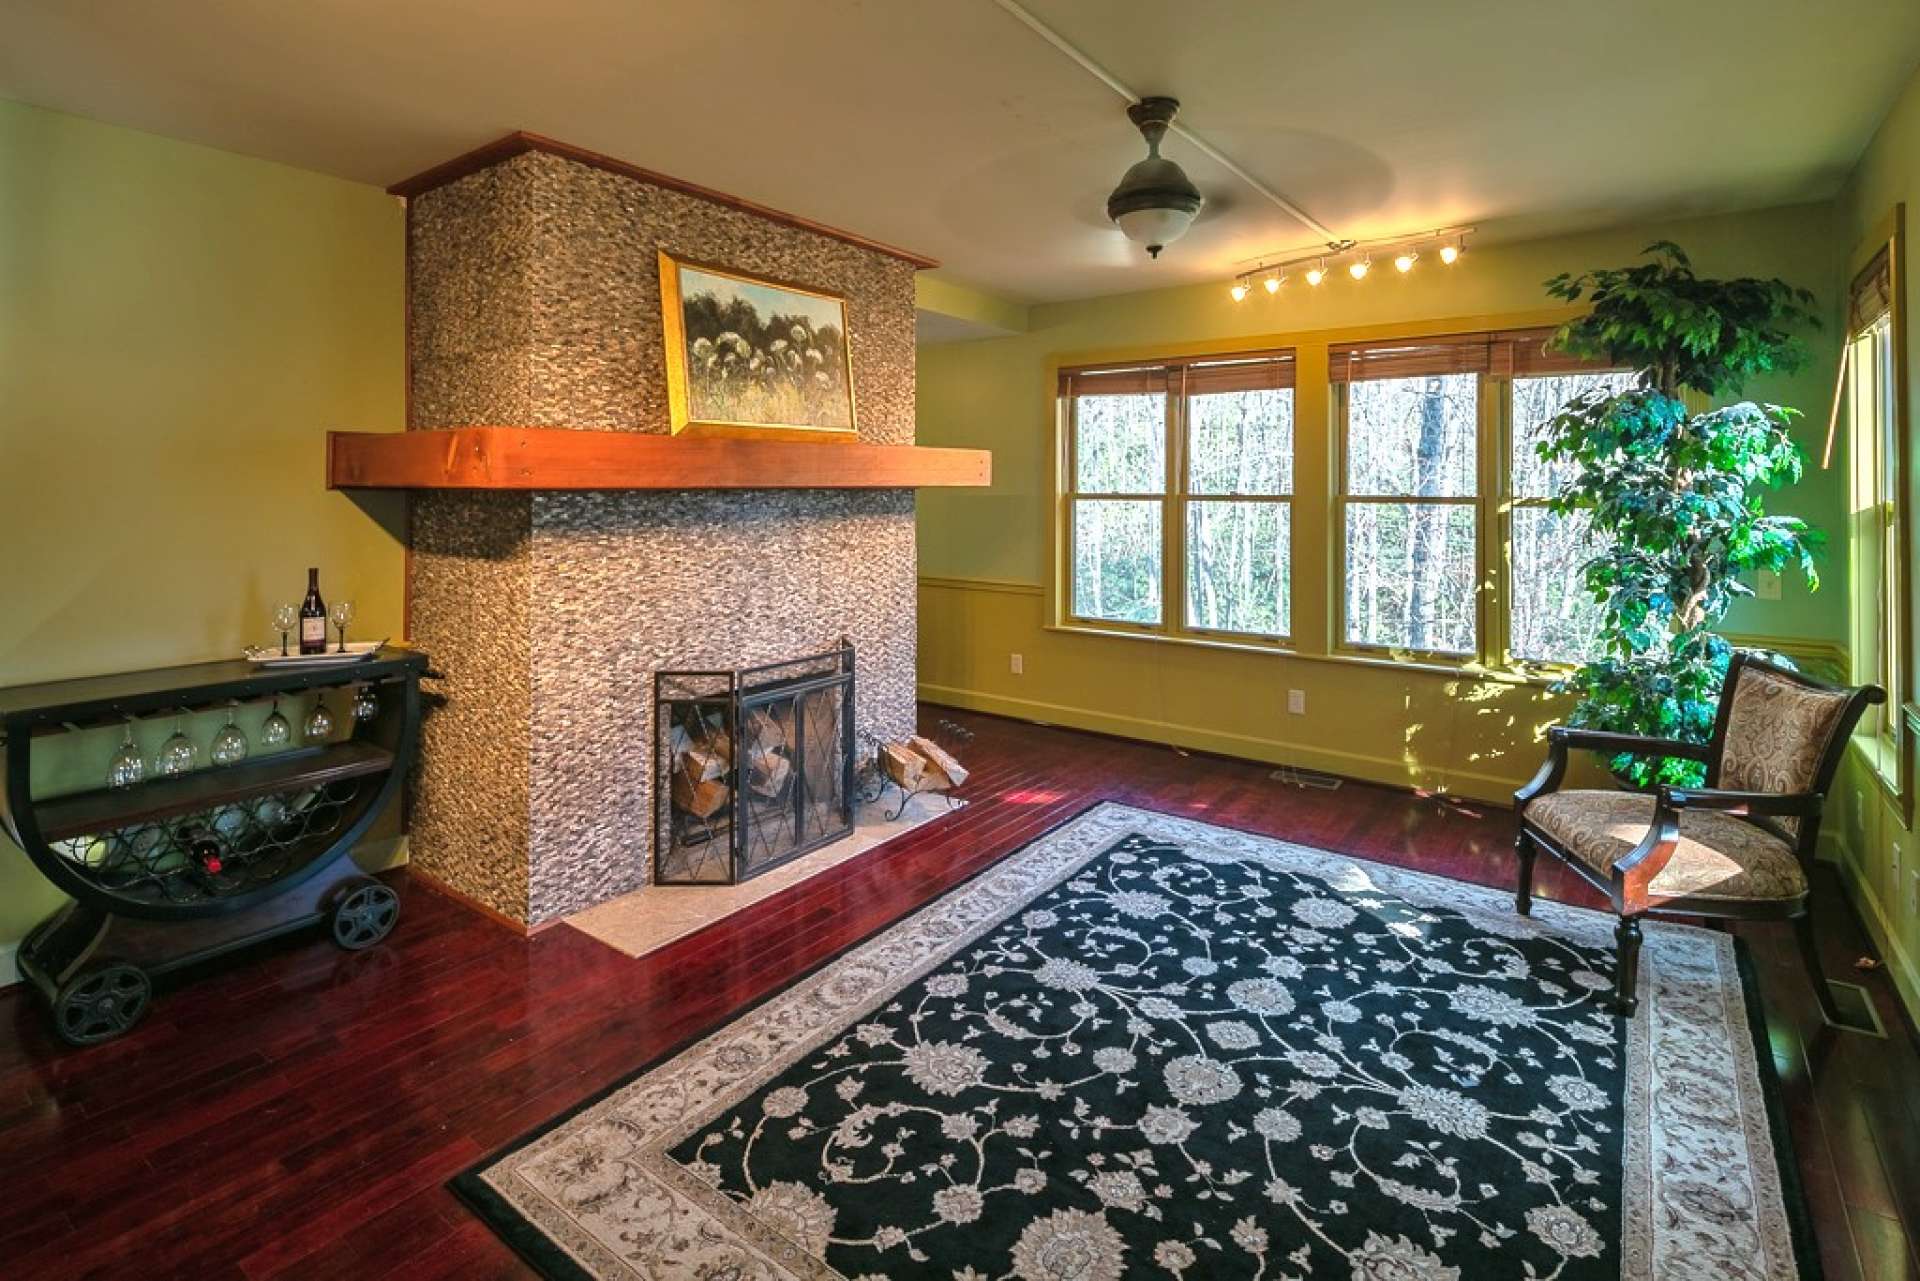 The main level welcomes you with a light and airy ambiance and features an open concept floor plan.  The living area features lots of windows, beautiful wood floor, and a striking wood-burning fireplace with stone surround.